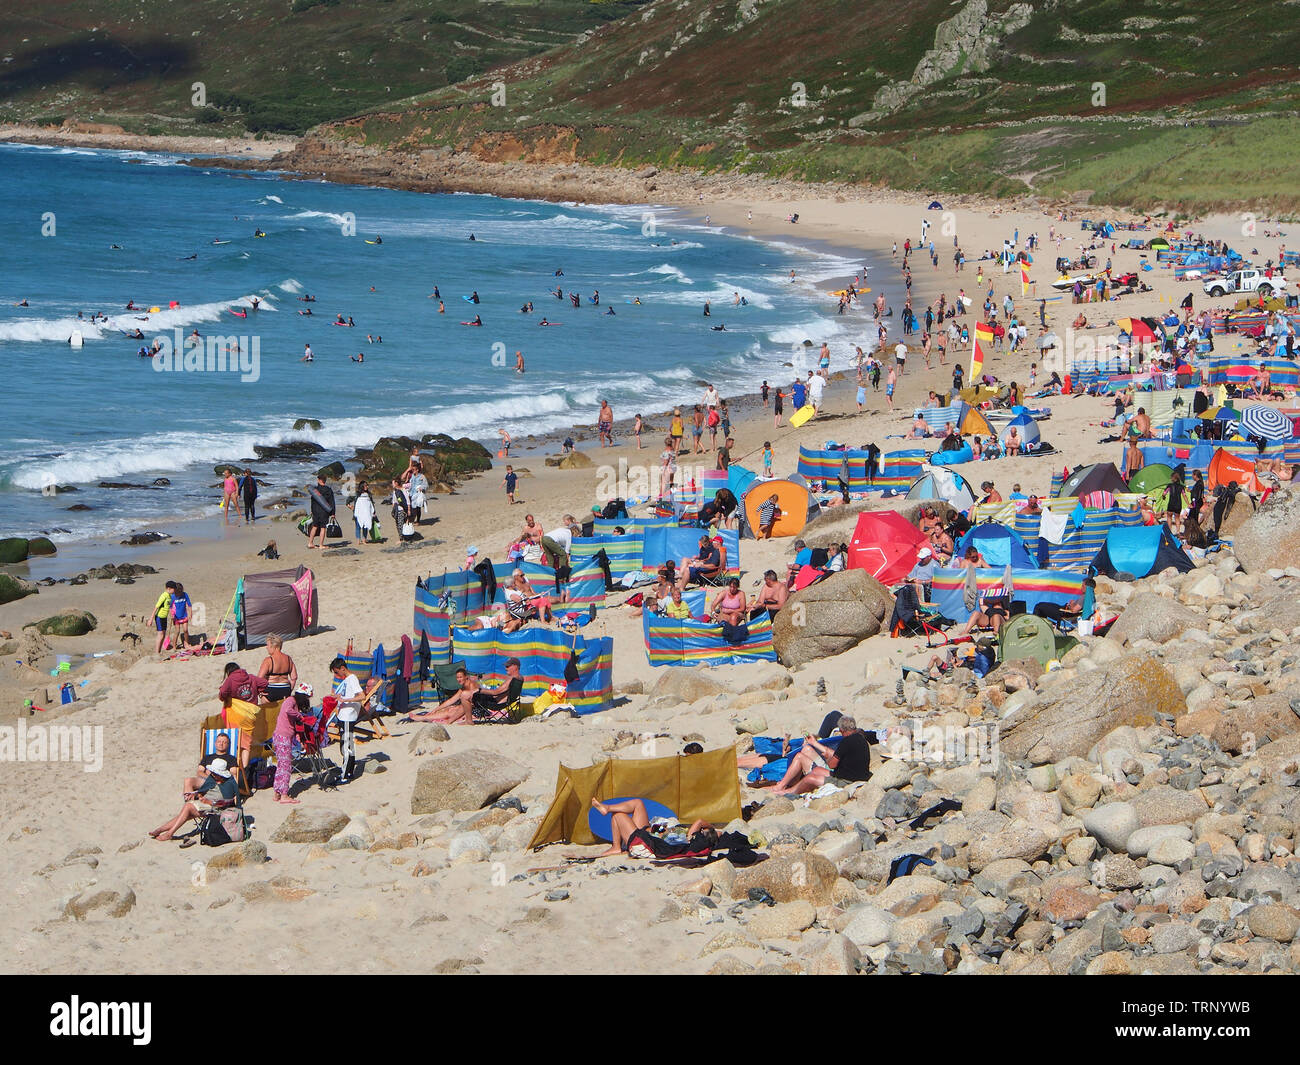 Crowds of people enjoying a sunny summers day on the beach in Sennen Cove, Cornwall, England UK showing the sandy beach and blue sea under a blue sky. Stock Photo